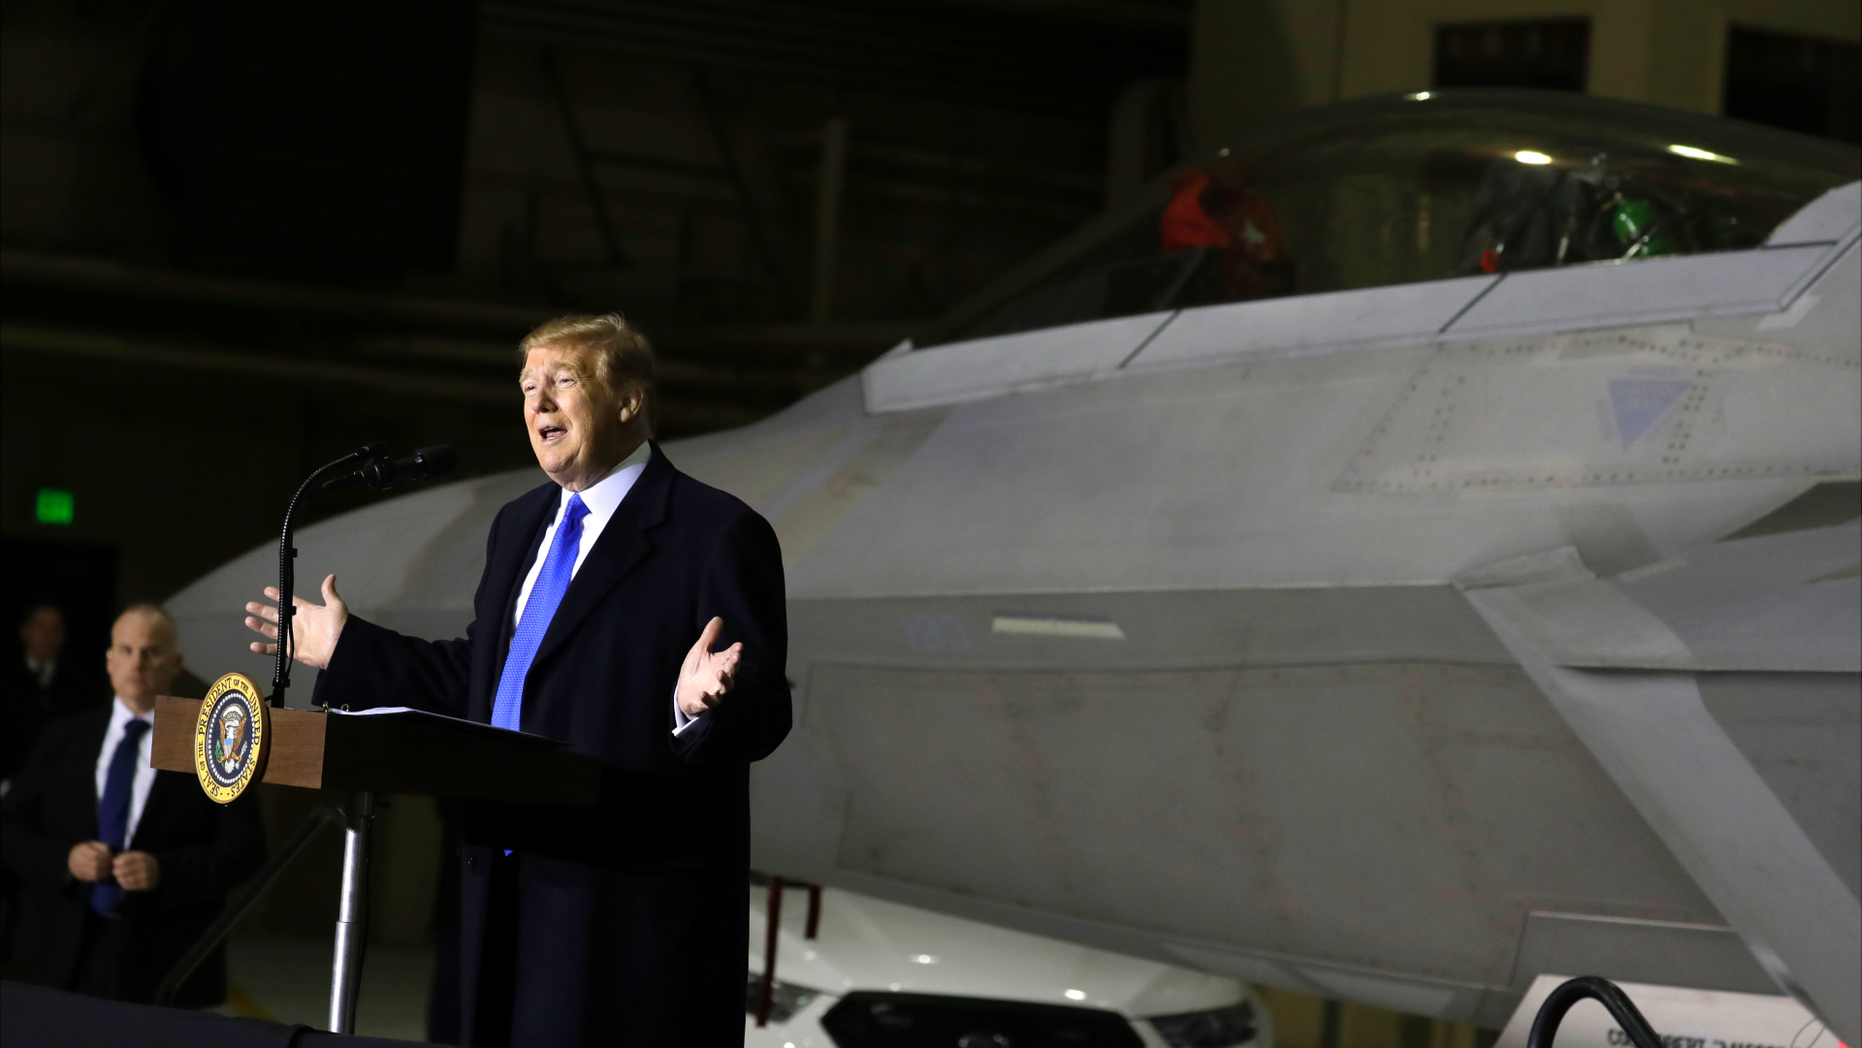 President Donald Trump addresses members of the Elmendorf-Richardson Common Base on Thursday, February 28, 2019 in Anchorage, Alaska, during a refueling stopover on his way home from Hanoi. (AP Photo / Evan Vucci)